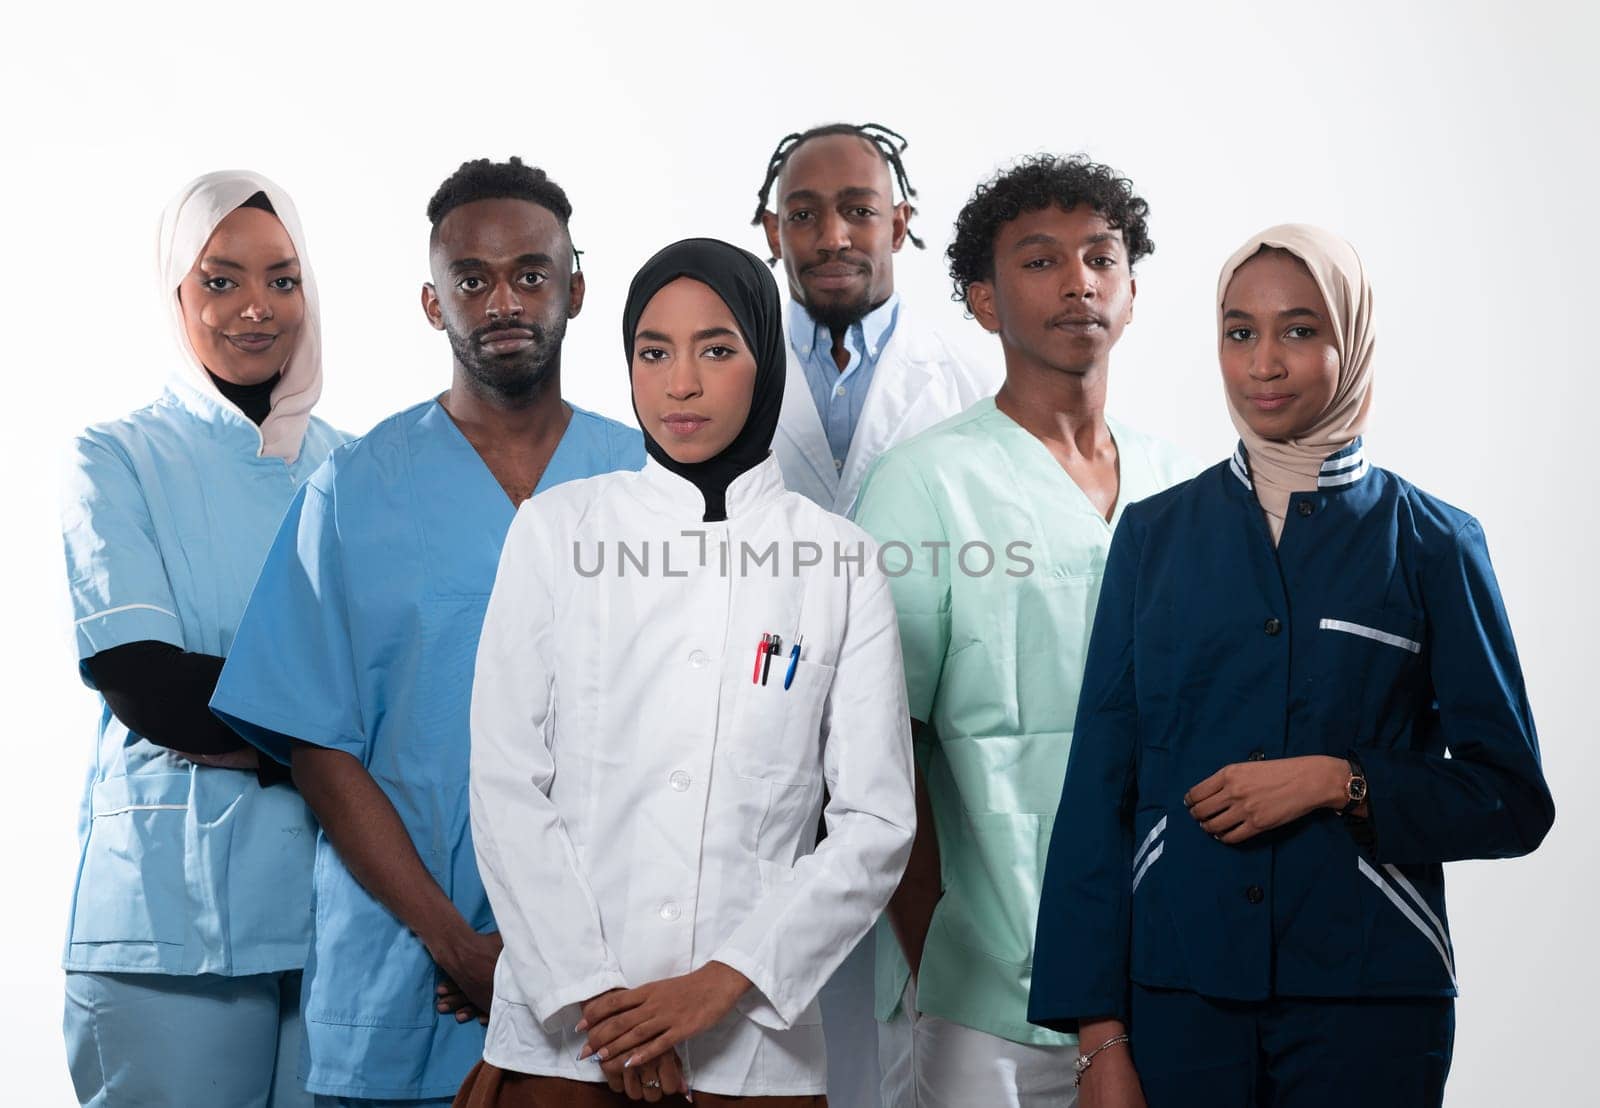 Team or group of a doctor, nurse and medical professional coworkers standing together. Portrait of diverse healthcare workers looking confident. Middle Eastern and African, Muslim medical team. High quality photo